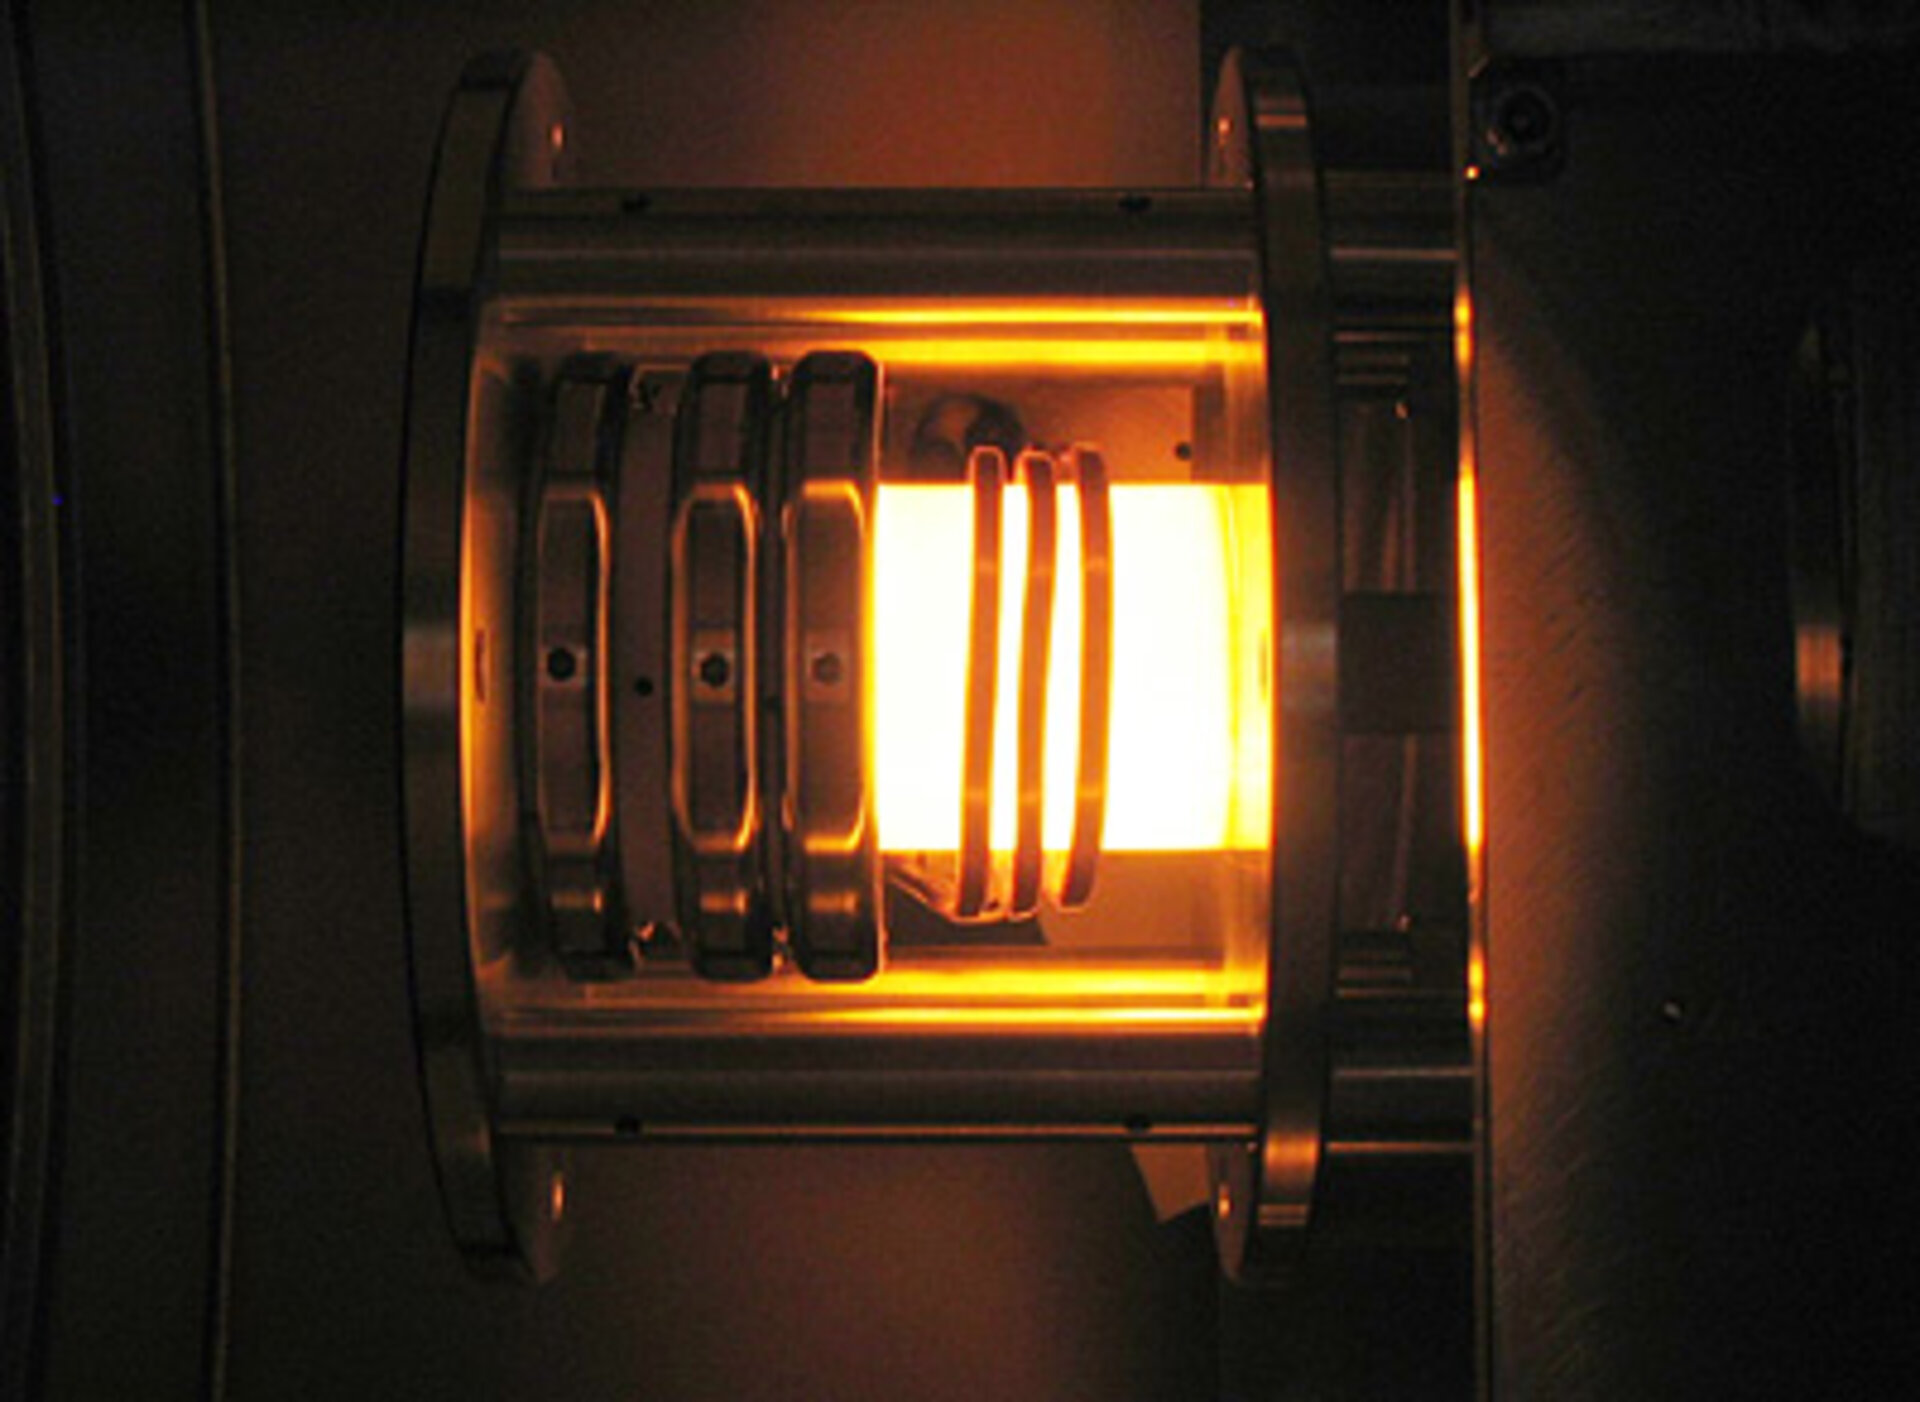 DS4G thruster firing during tests